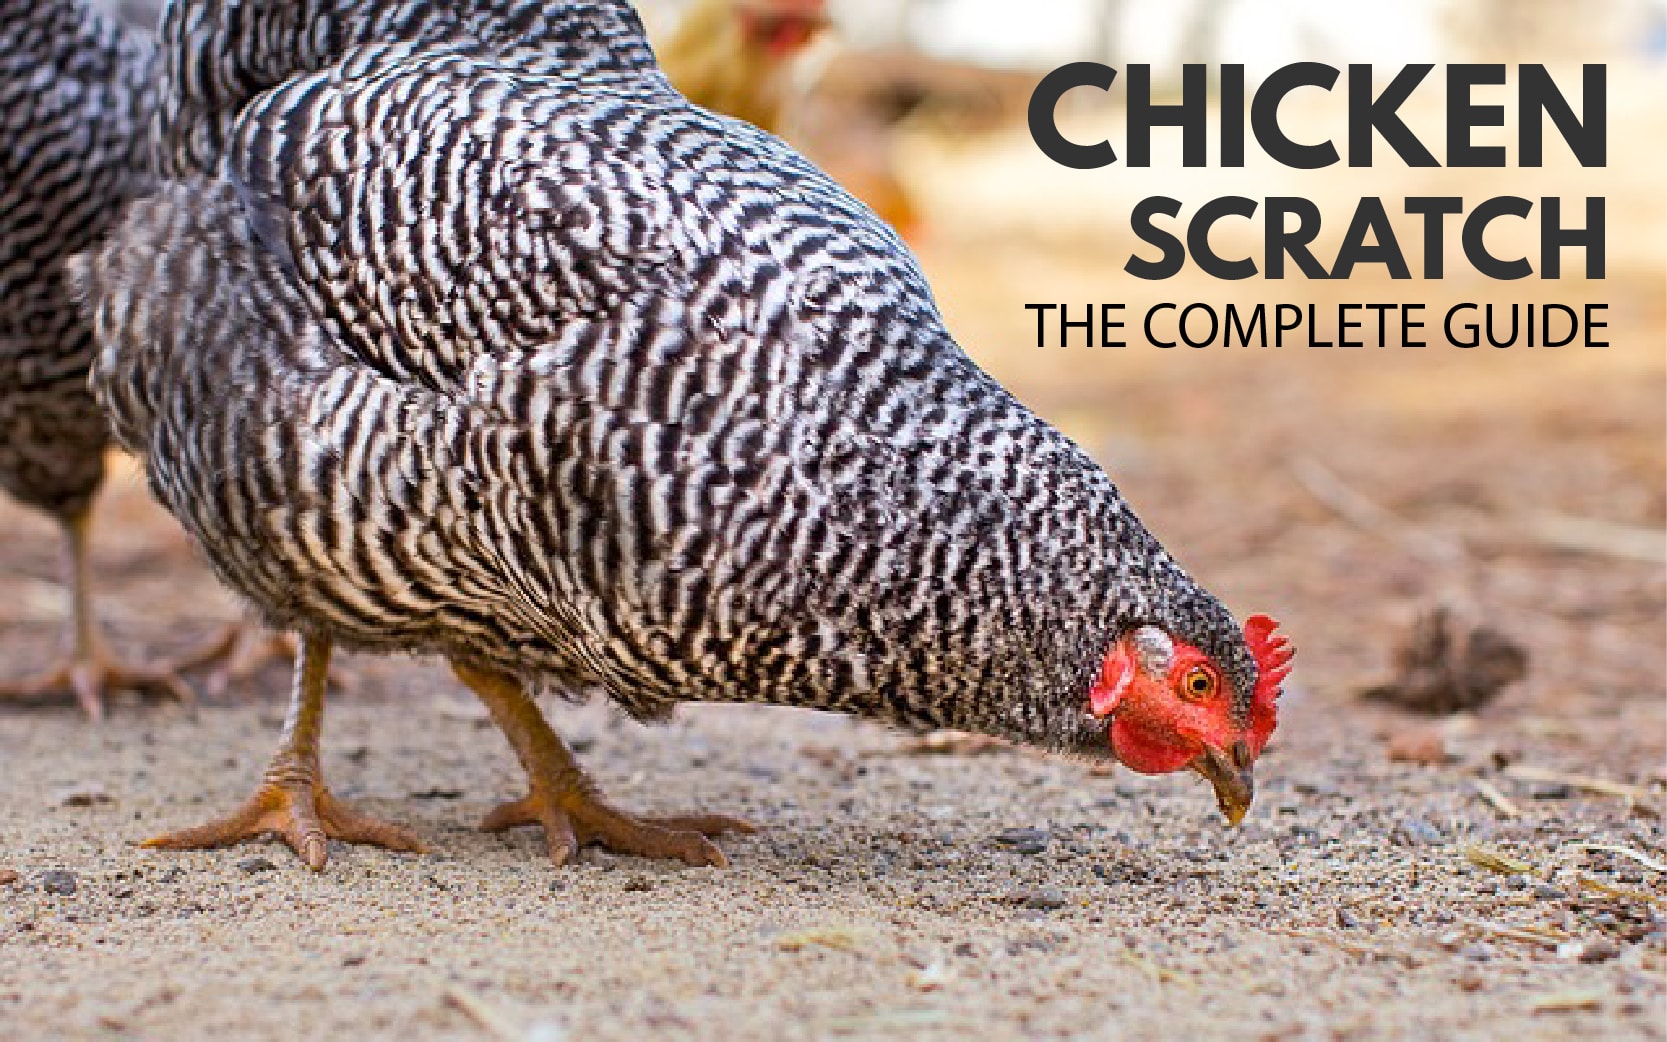 Feeding Chicken Scratch To Your Backyard Chickens How To Guide 